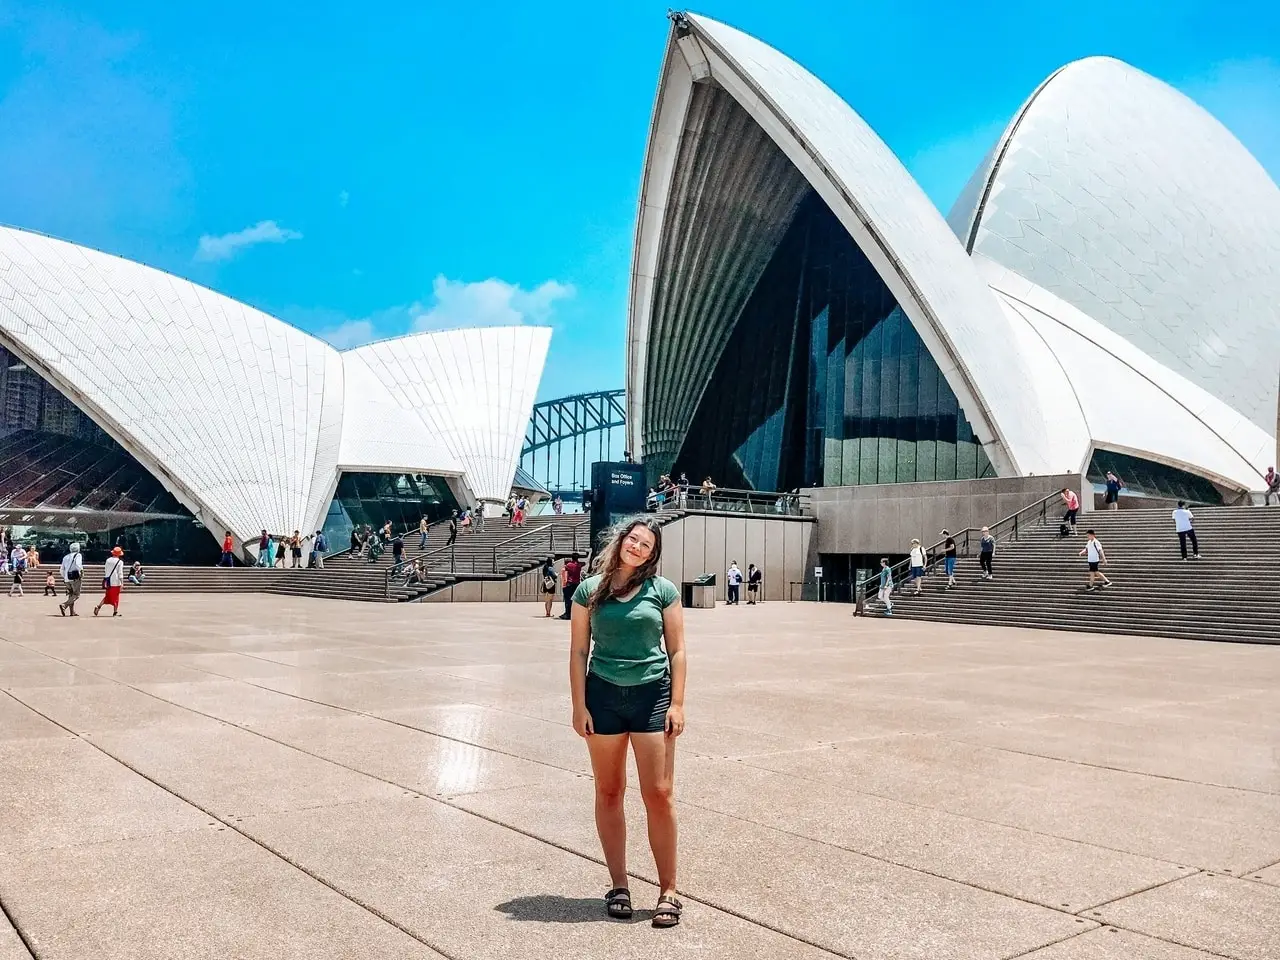 Visiting the sydney opera house is one of my favourite backpacking Australia tips